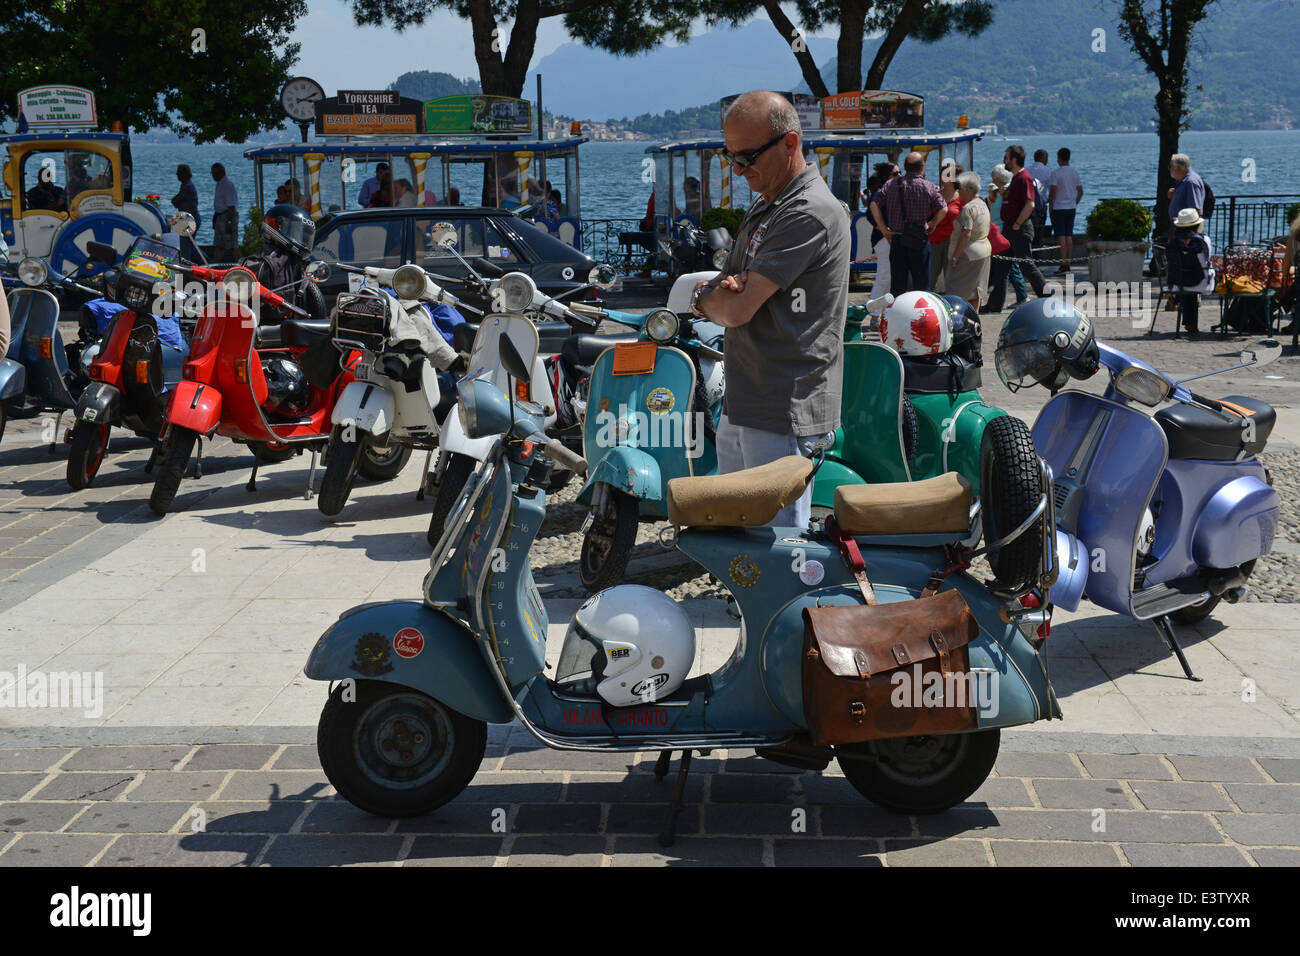 Vintage Italian Vespa scooter at scooters rally in Italy. 1964 Vespa 150 in foreground Stock Photo